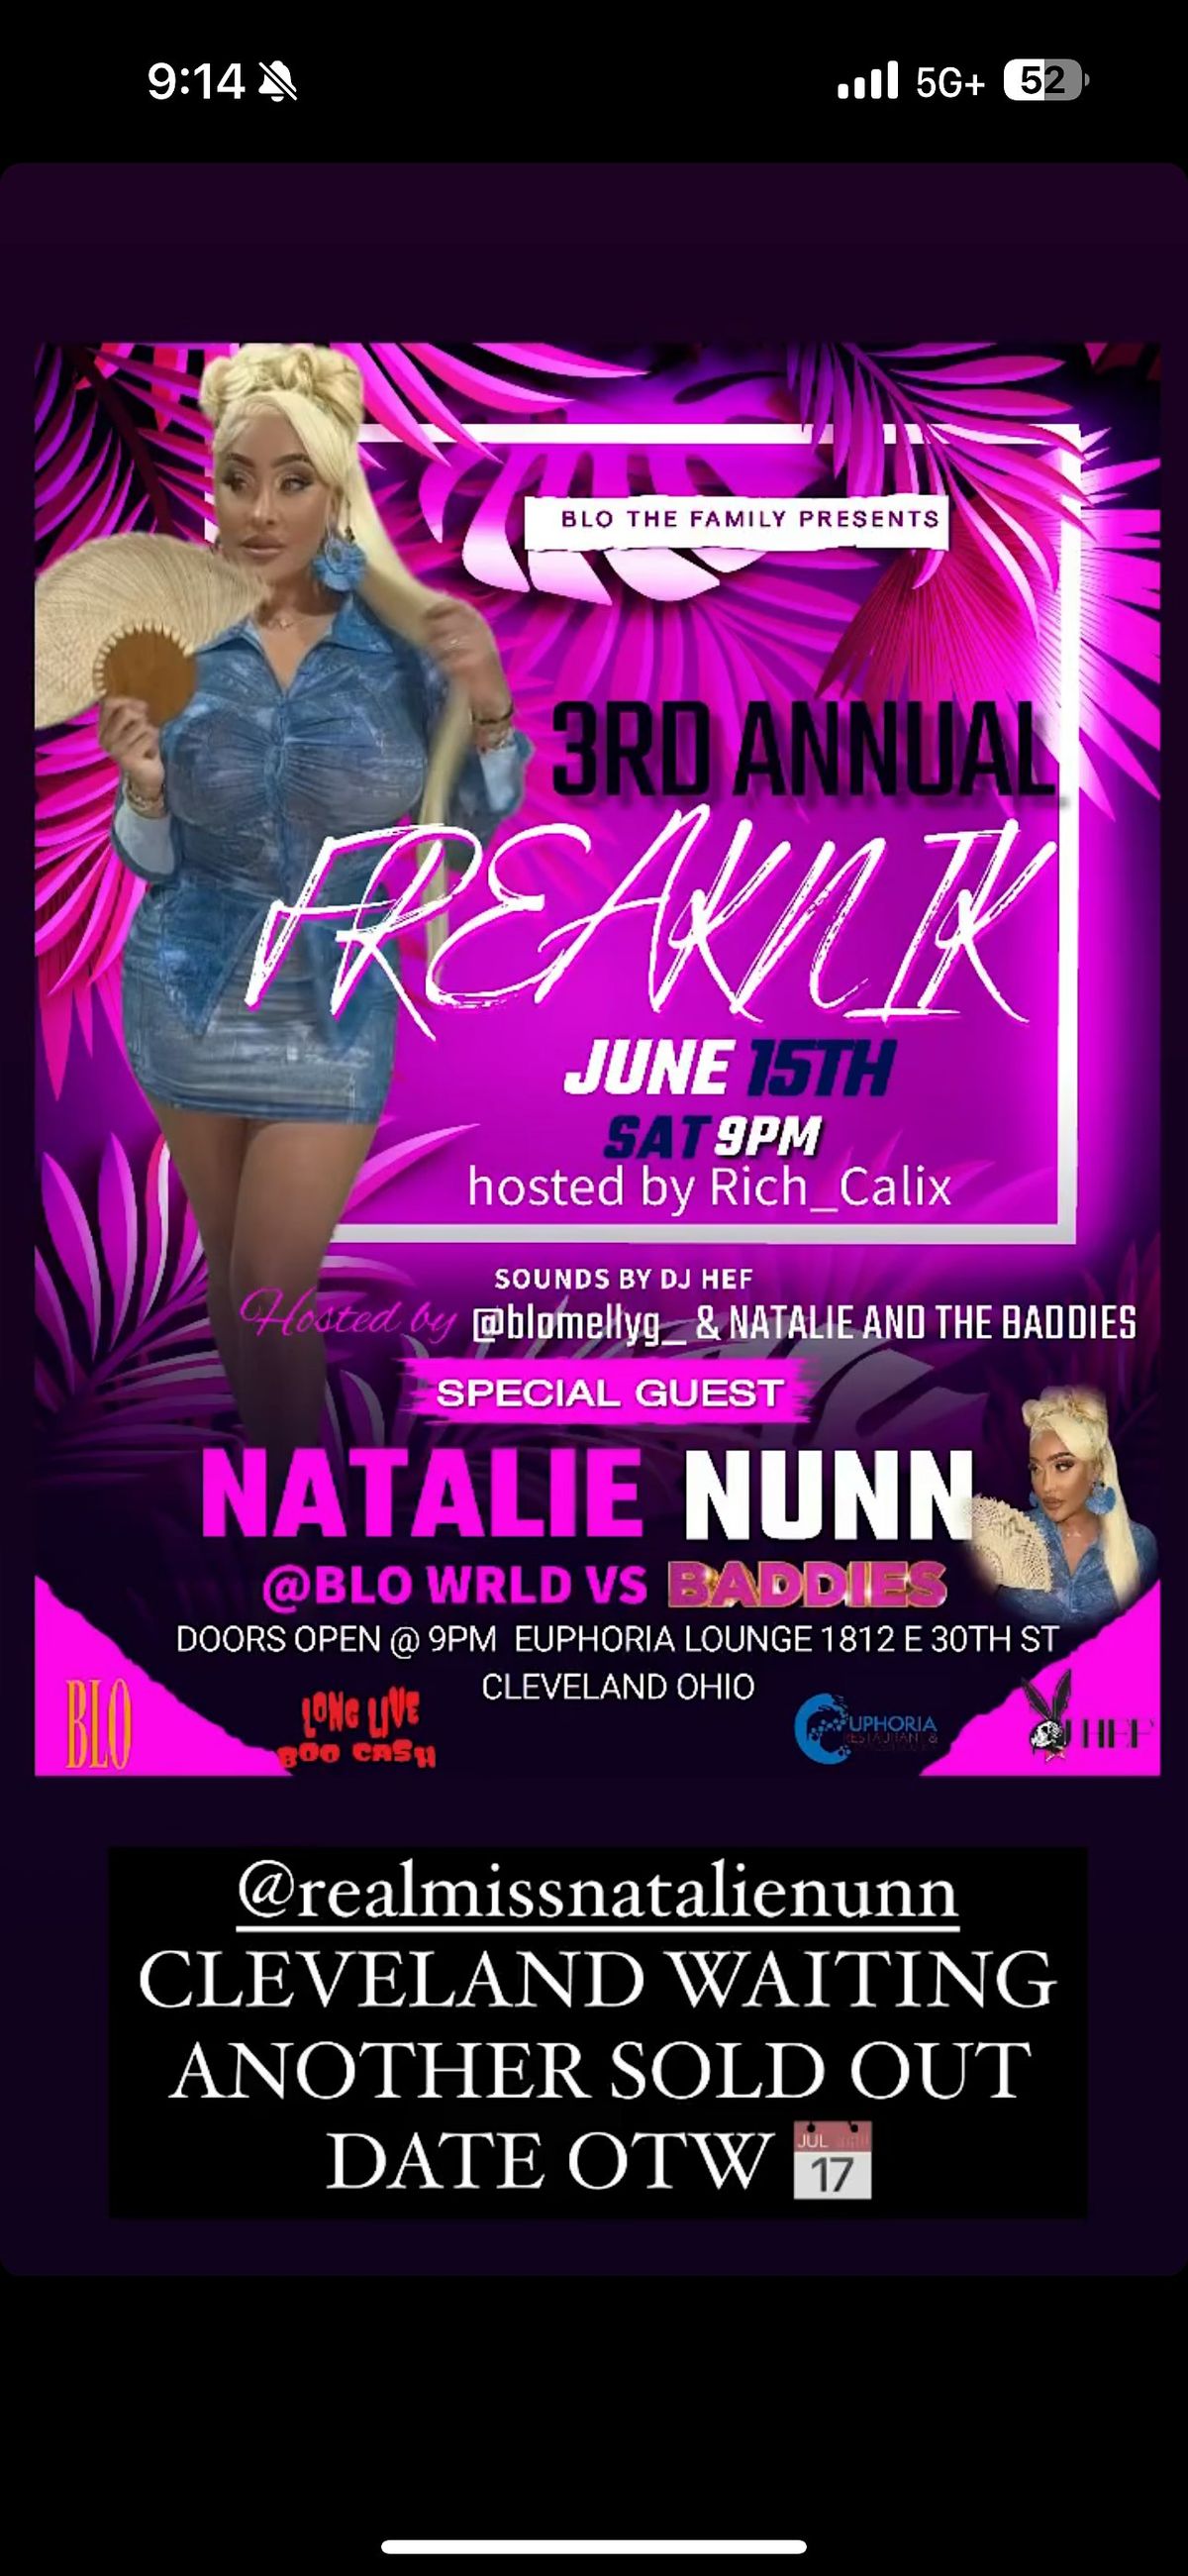 JUNE 15TH ALL ROADS LEAD TO The OFFICIAL 3RD ANNUAL FREAKNIK BLO VS BADDIES